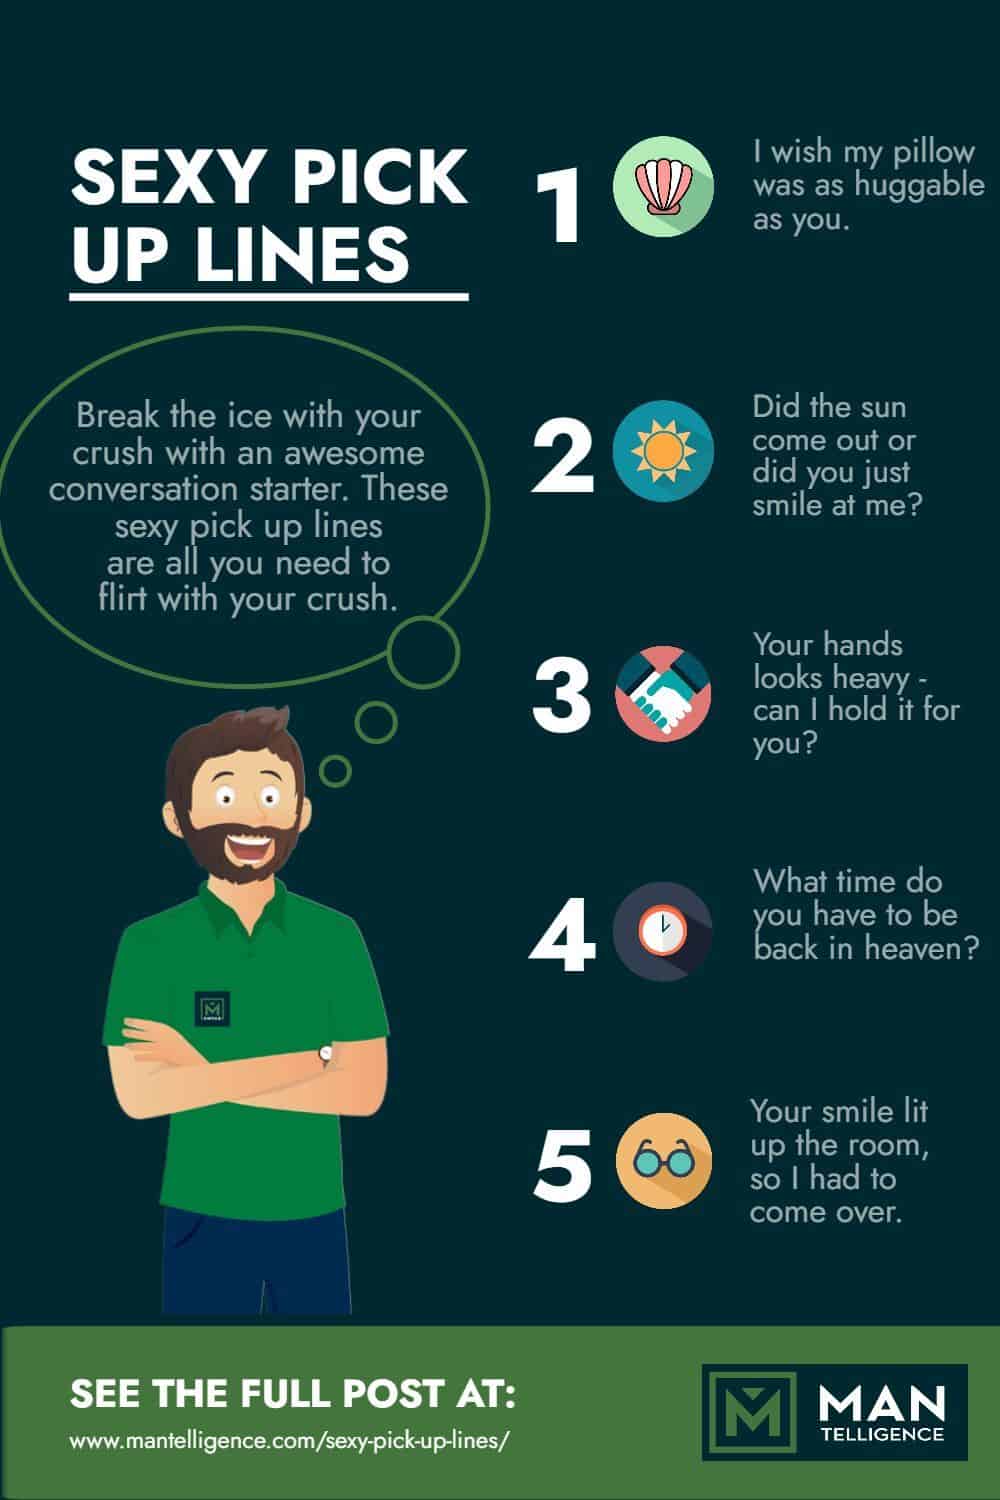 Sexy pick up lines - Infographic